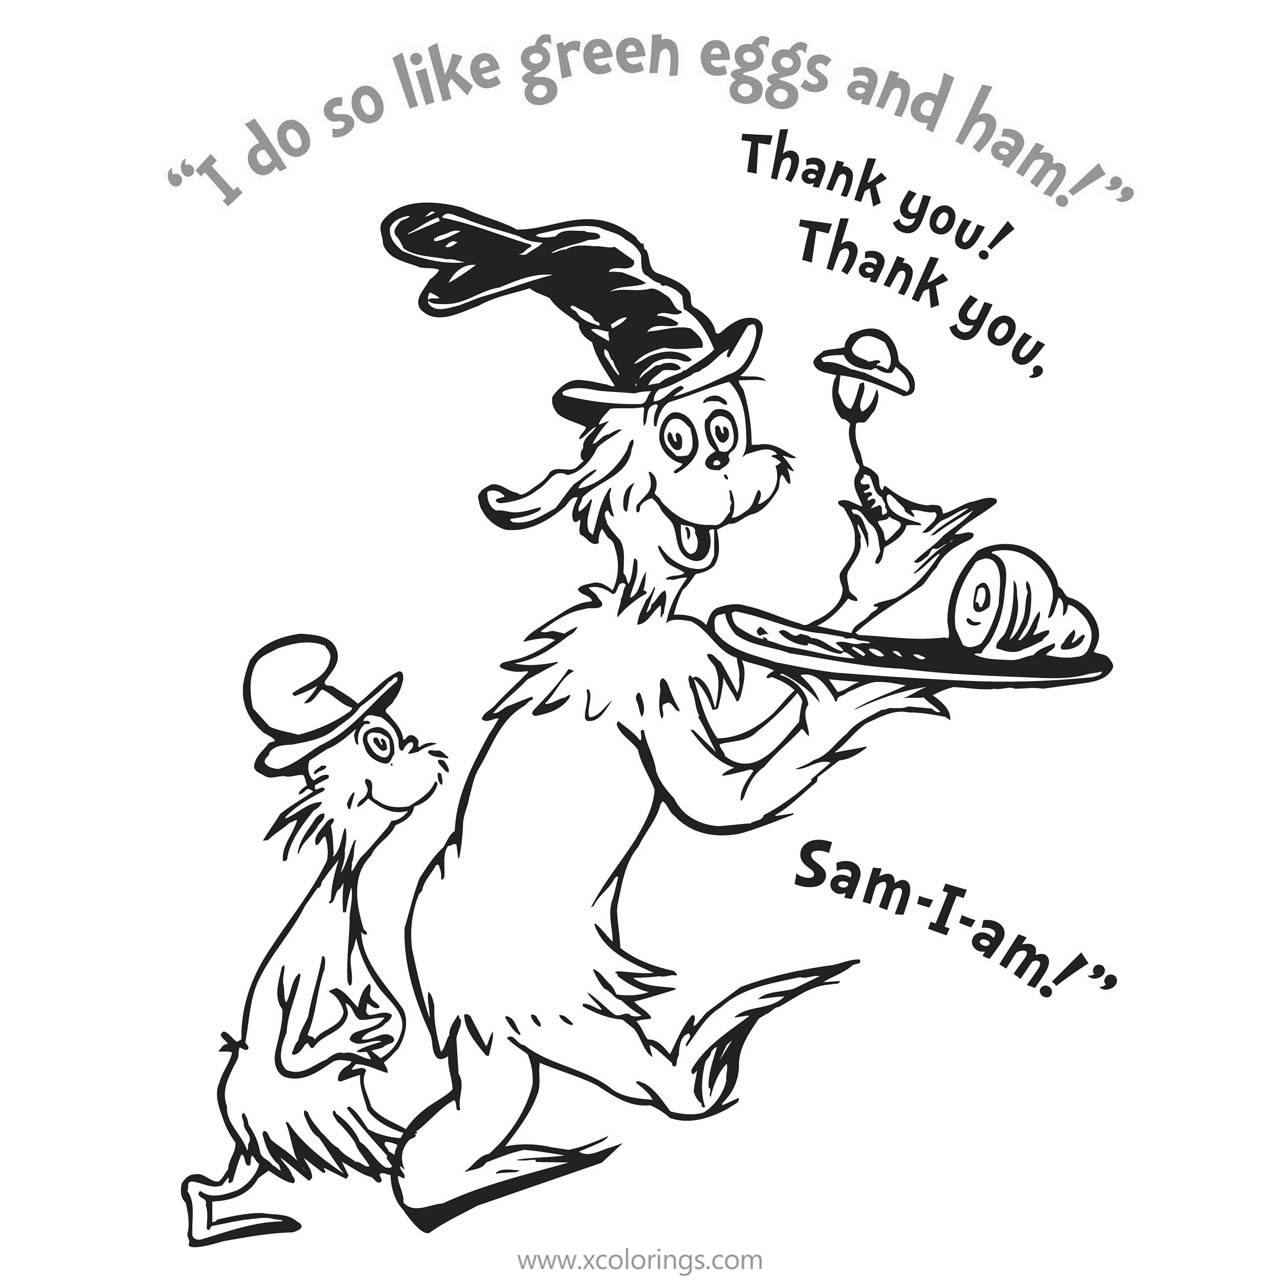 Free Green Eggs and Ham Coloring Pages Sam I Am with Guy Am I printable